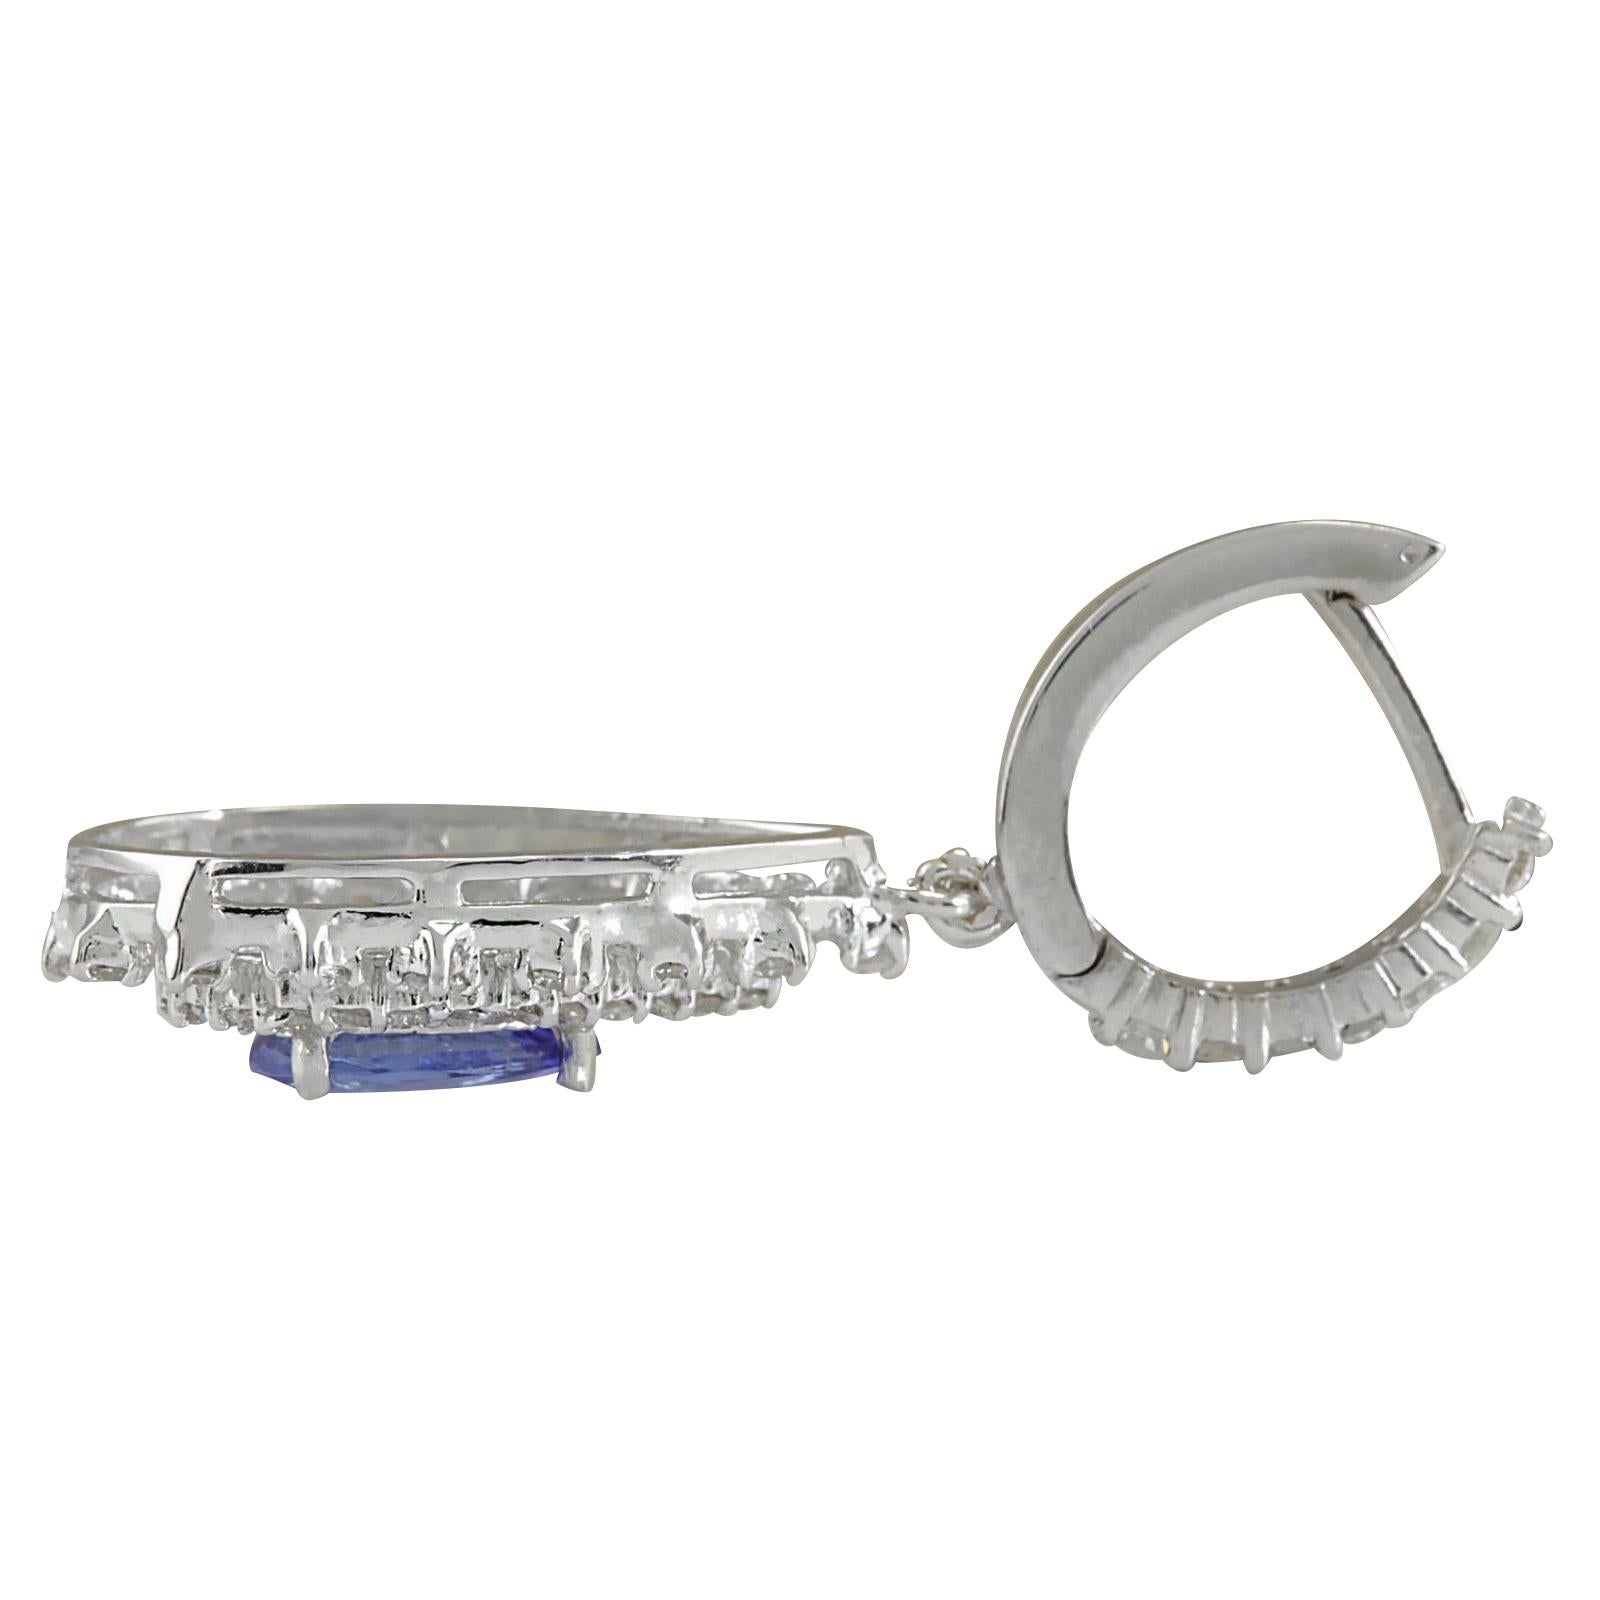 Stamped: 14K White Gold
Total Earrings Weight: 8.1 Grams
Total Natural Tanzanite Weight is 2.89 Carat (Measures: 9.00x6.00 mm)
Color: Blue
Total Natural Diamond Weight is 2.38 Carat
Color: F-G, Clarity: VS2-SI1
Face Measures: 21.90x15.75 mm
Sku: